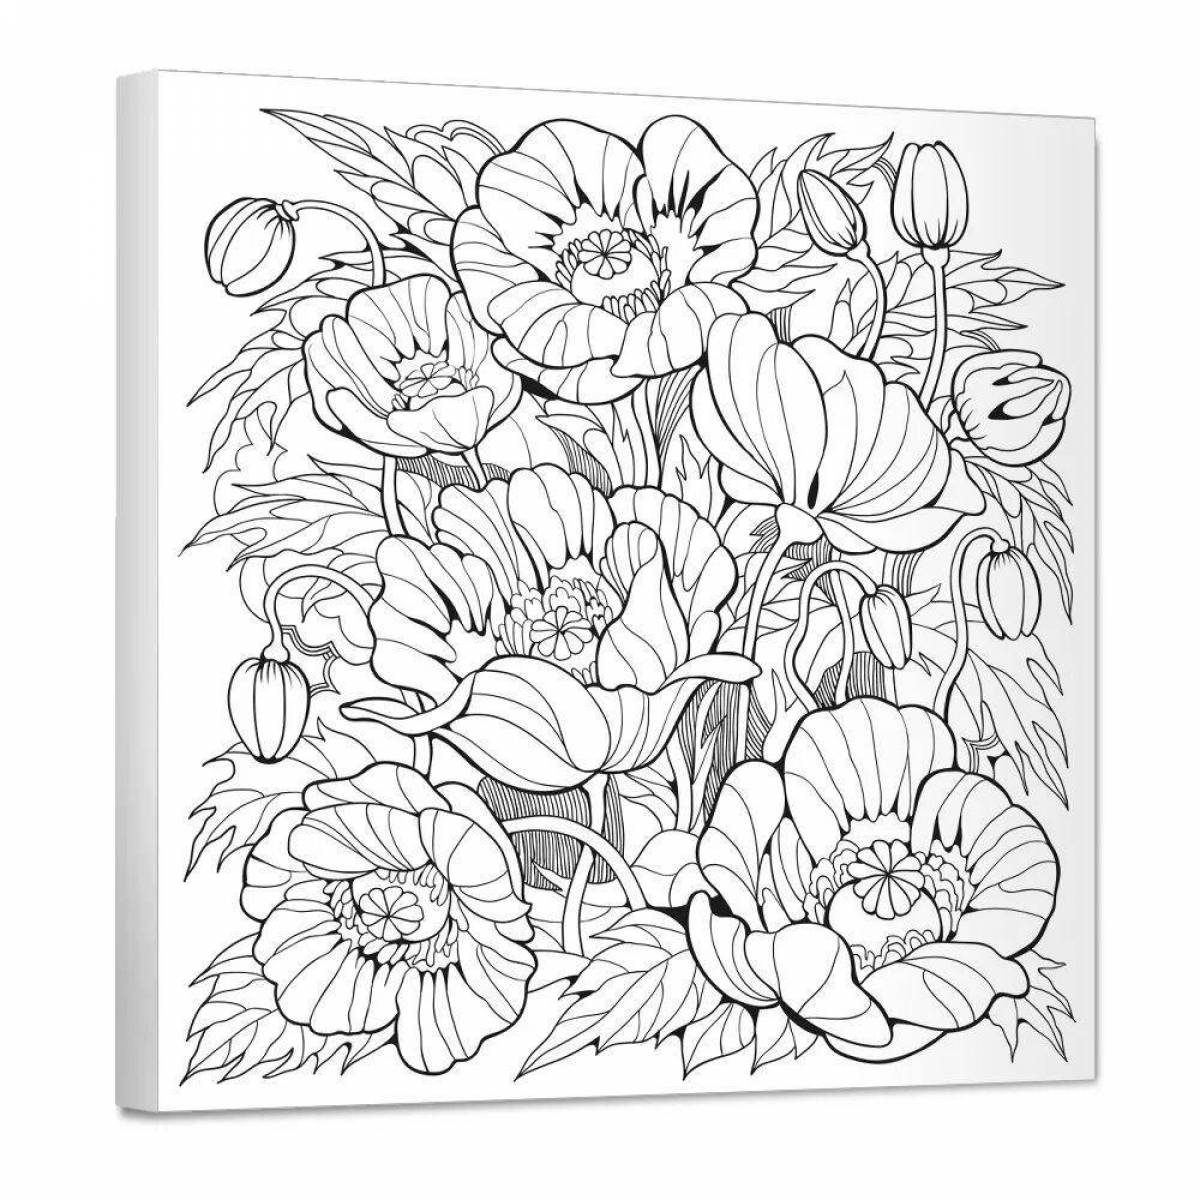 A wonderful a3 coloring book